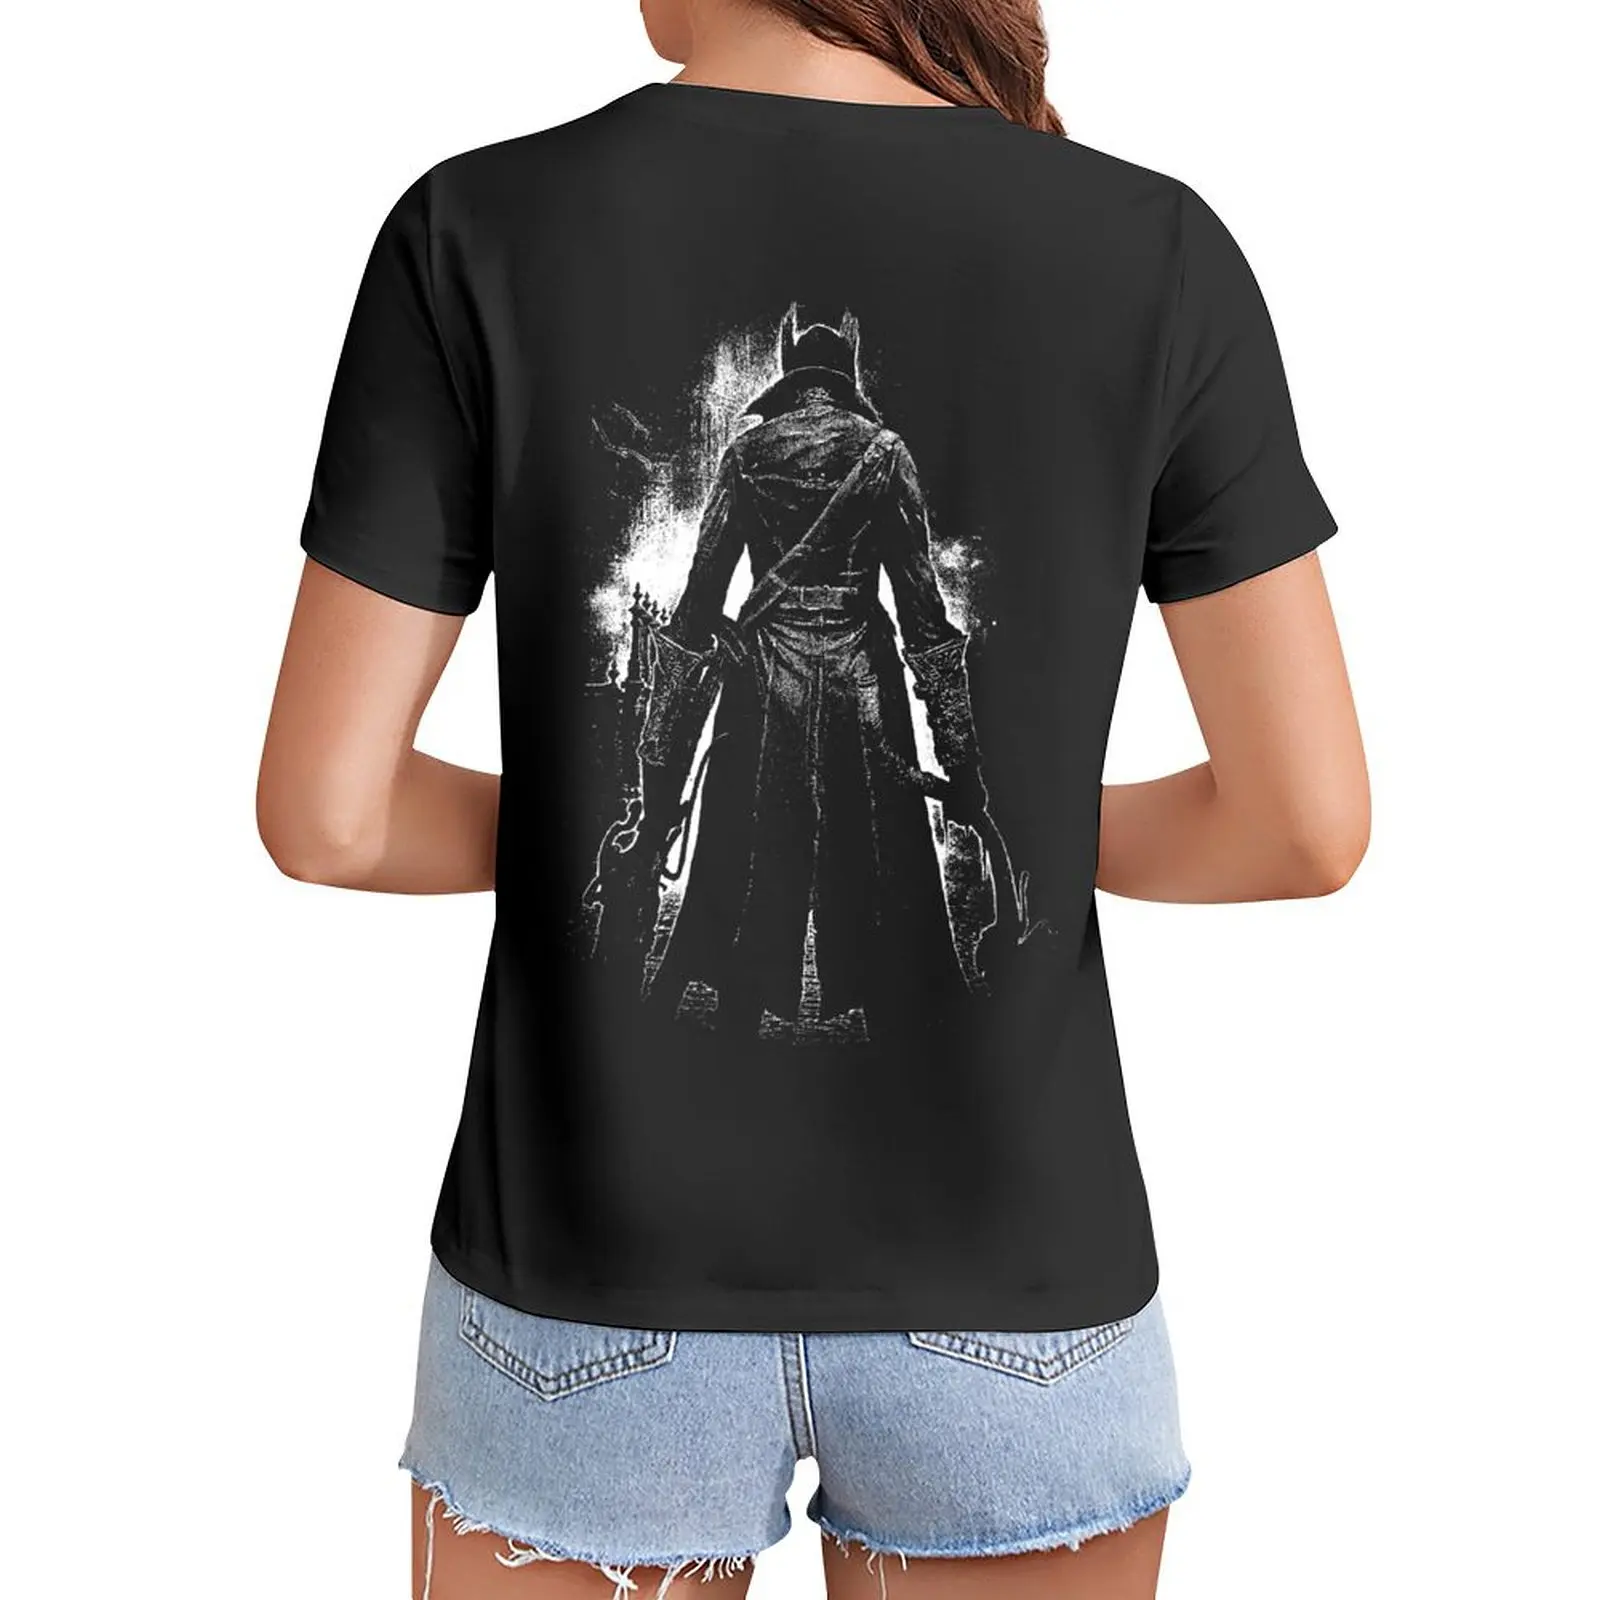 

Old Blood T-Shirt customs sports fans heavyweights oversized black t shirts for Women